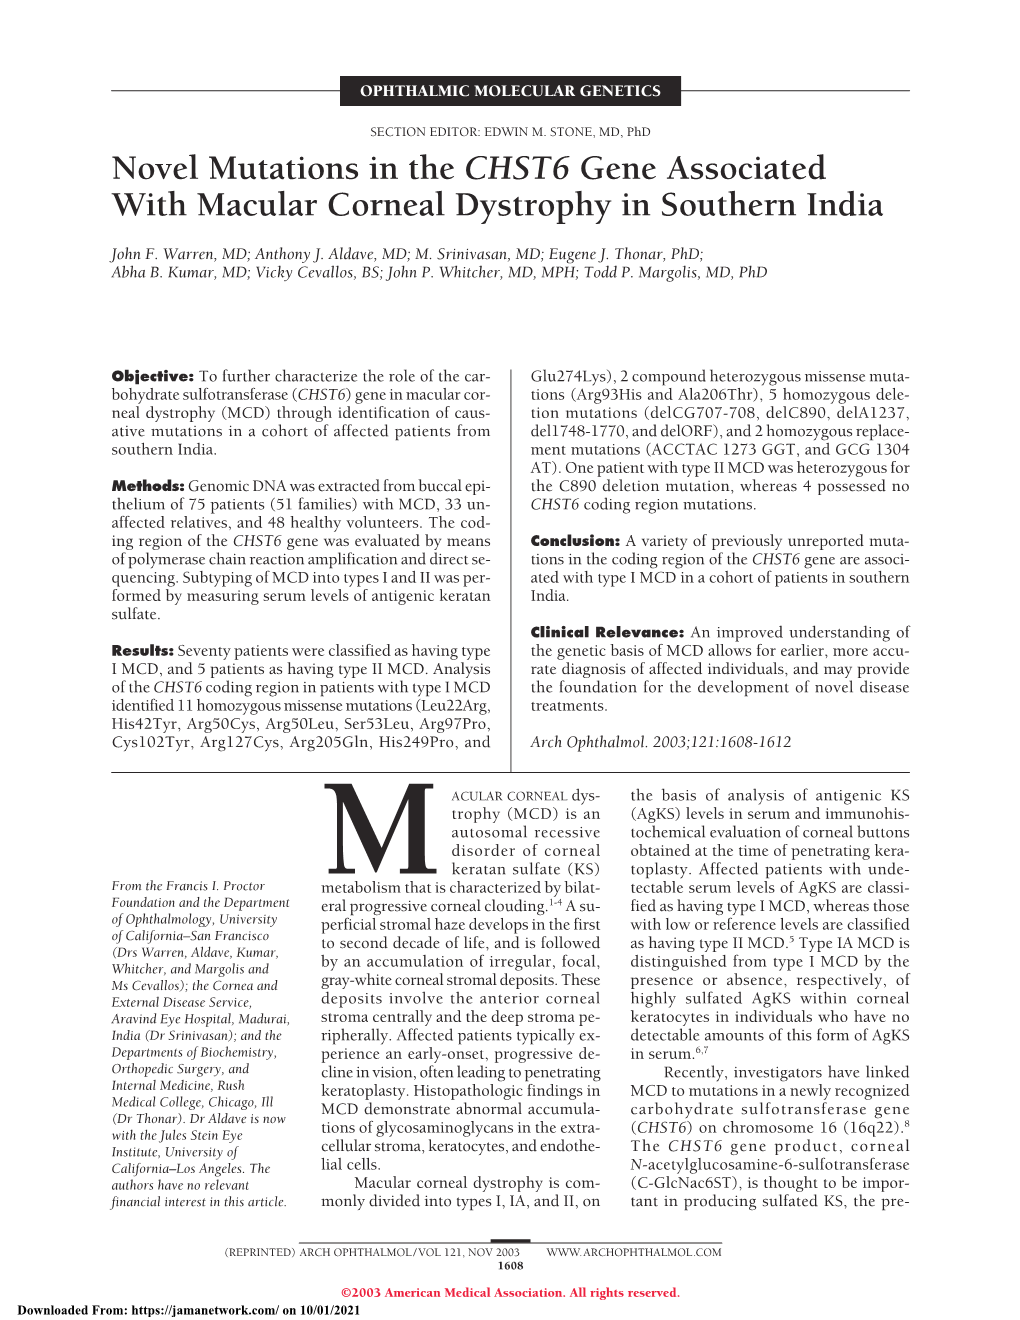 Novel Mutations in the CHST6 Gene Associated with Macular Corneal Dystrophy in Southern India